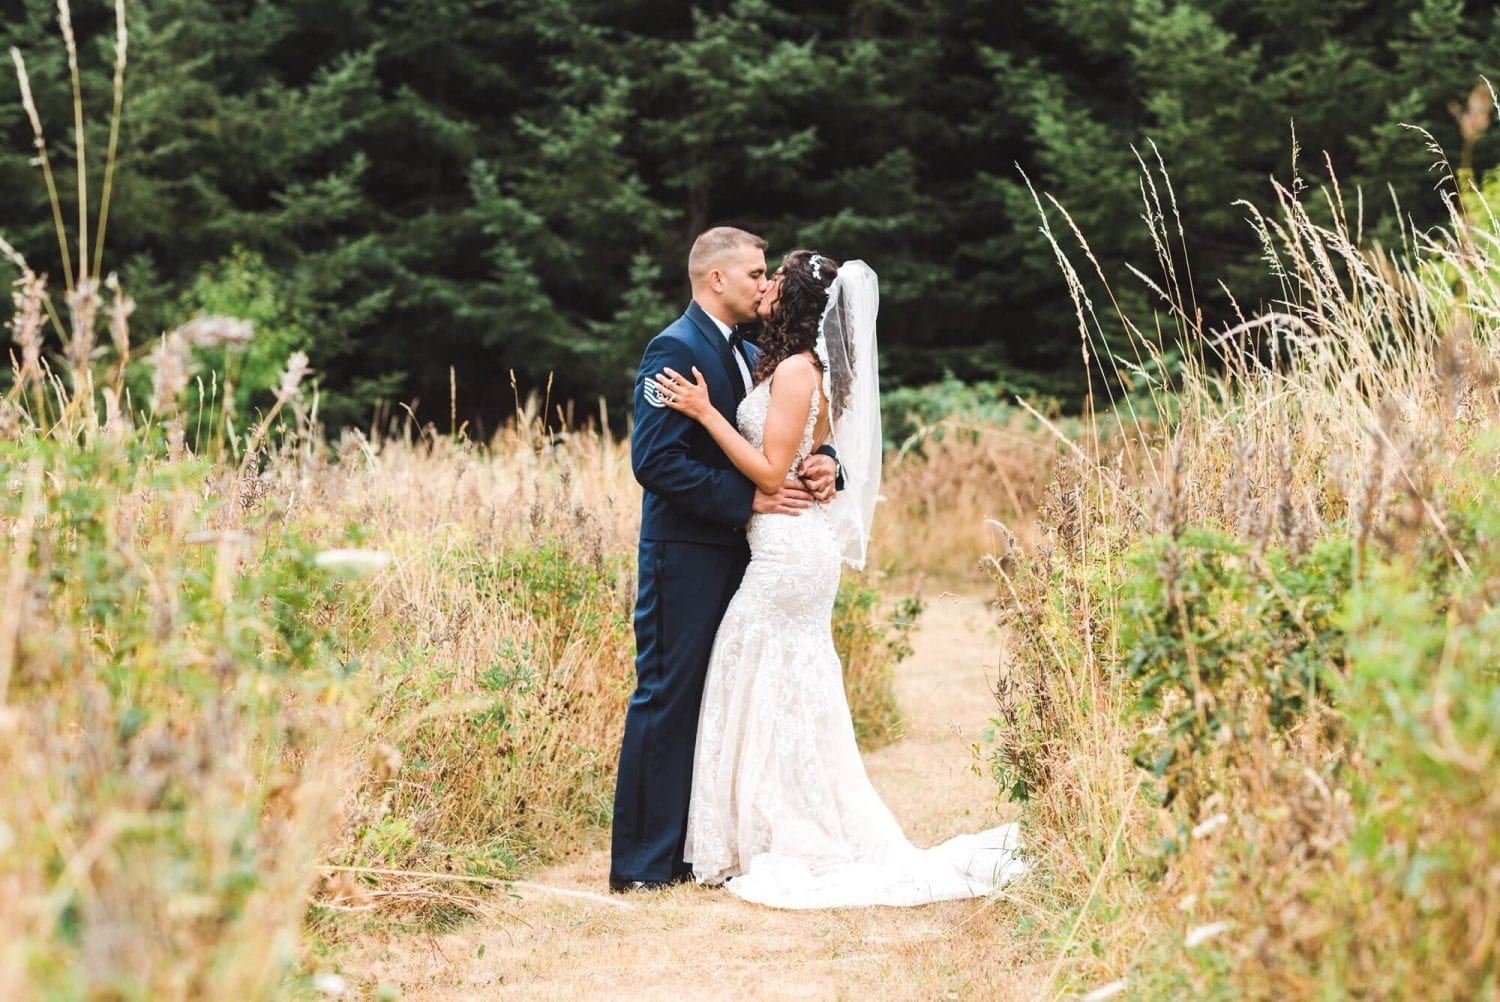 A gorgeous couple during their elopement in Washington State